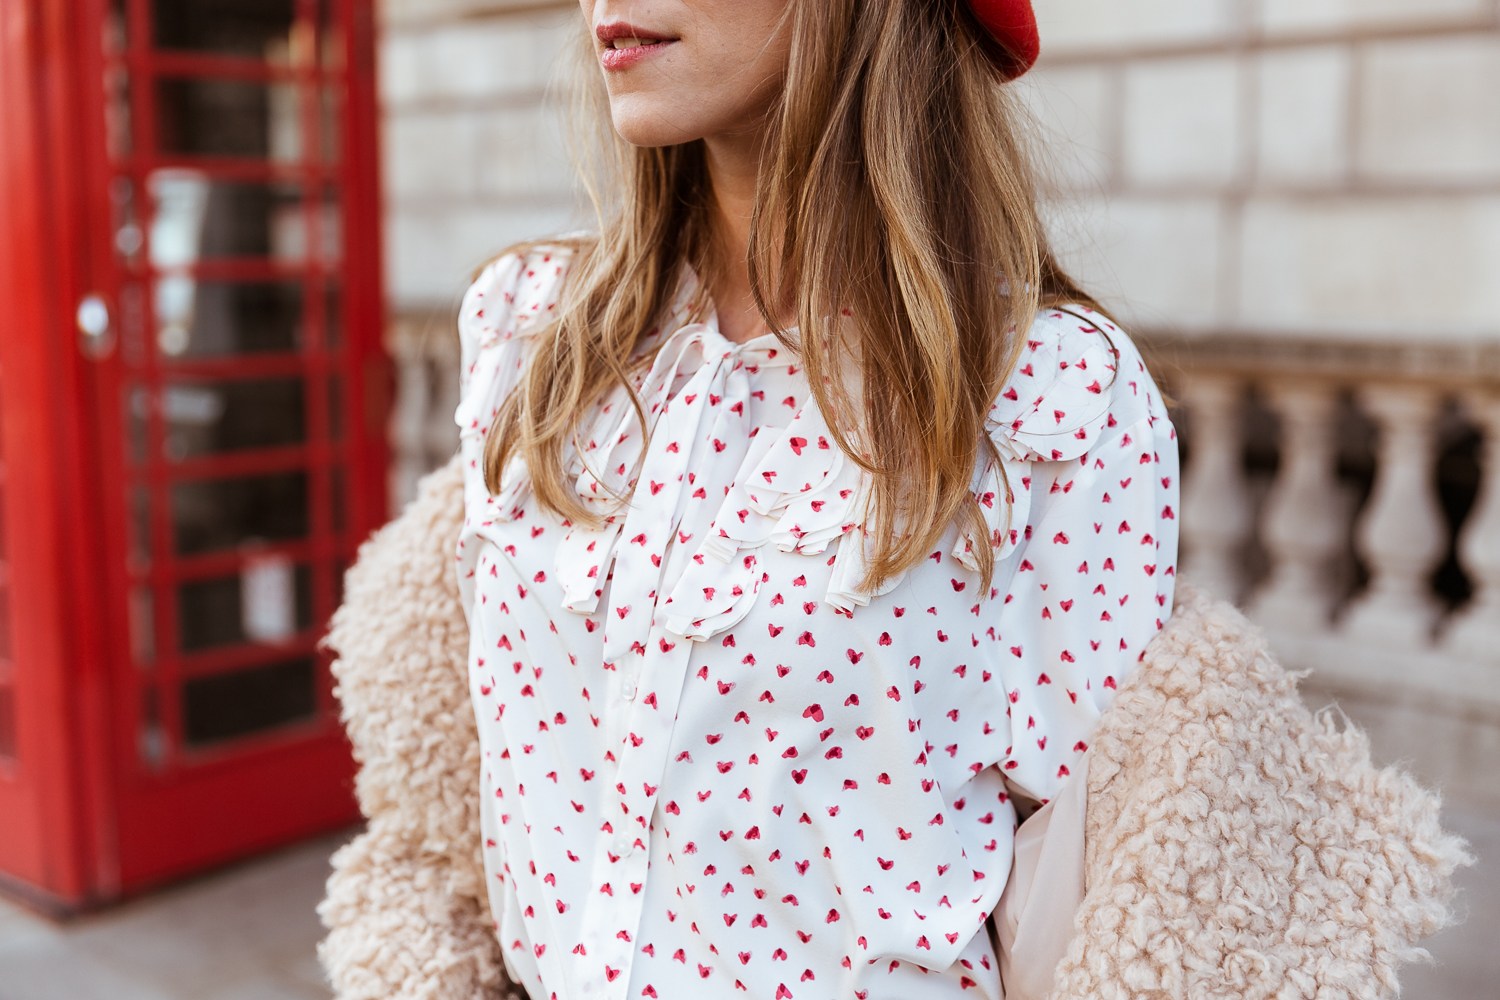 teddy coat levis 501 jeans red hat steffen schraut blouse hearts red valentino bag outfit street style london white boots veja du details